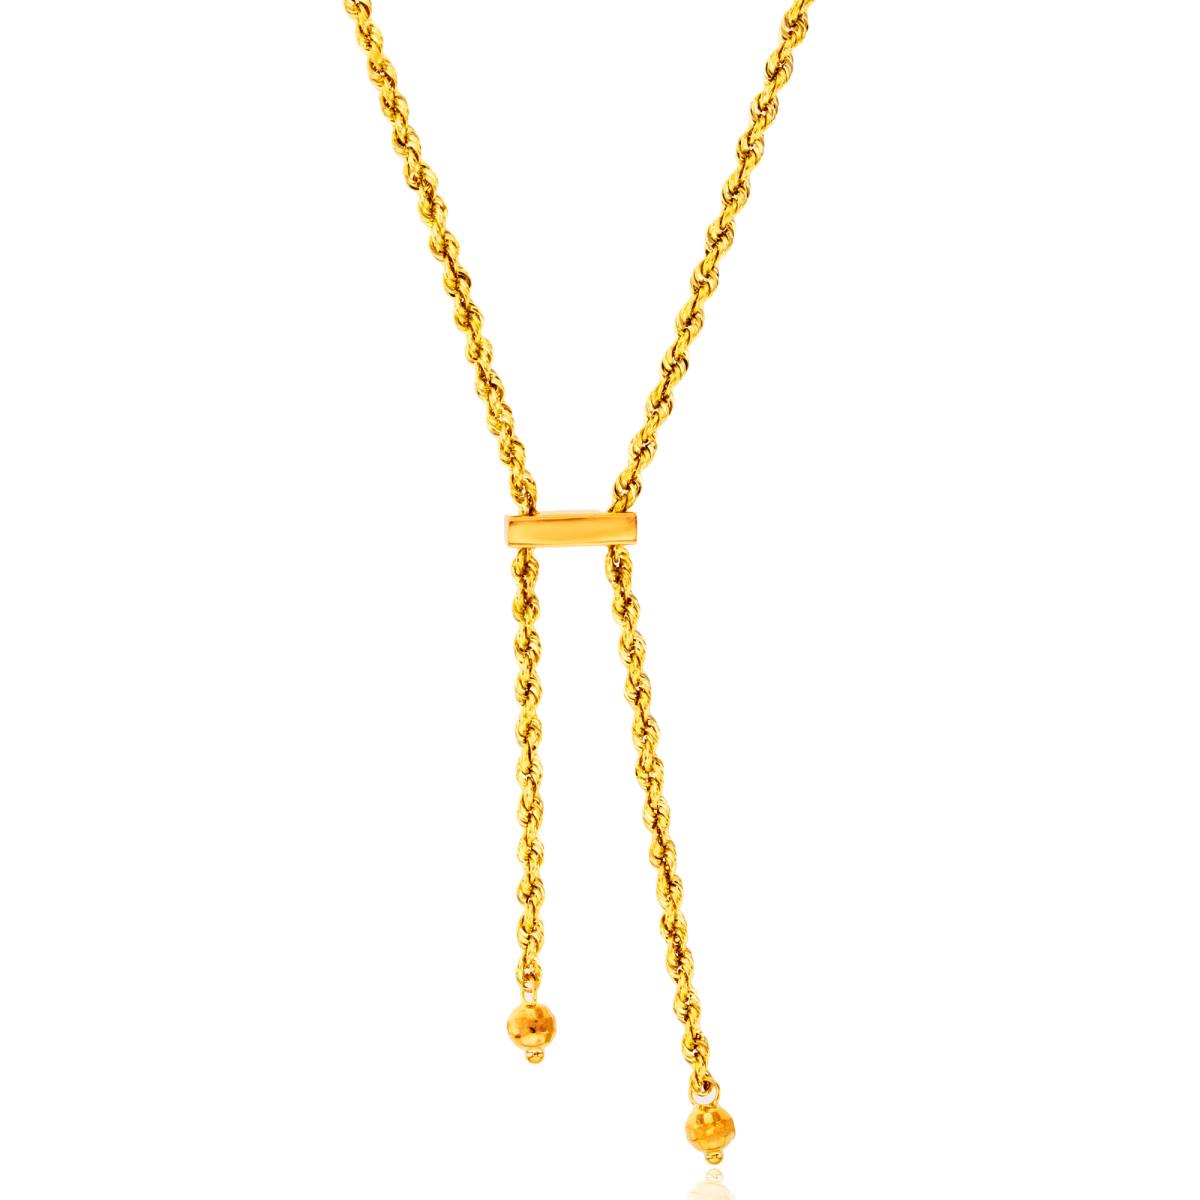 10K Yellow Gold 2.25mm DC Rope Dangling Bar/Beads 17" "Y" Necklace